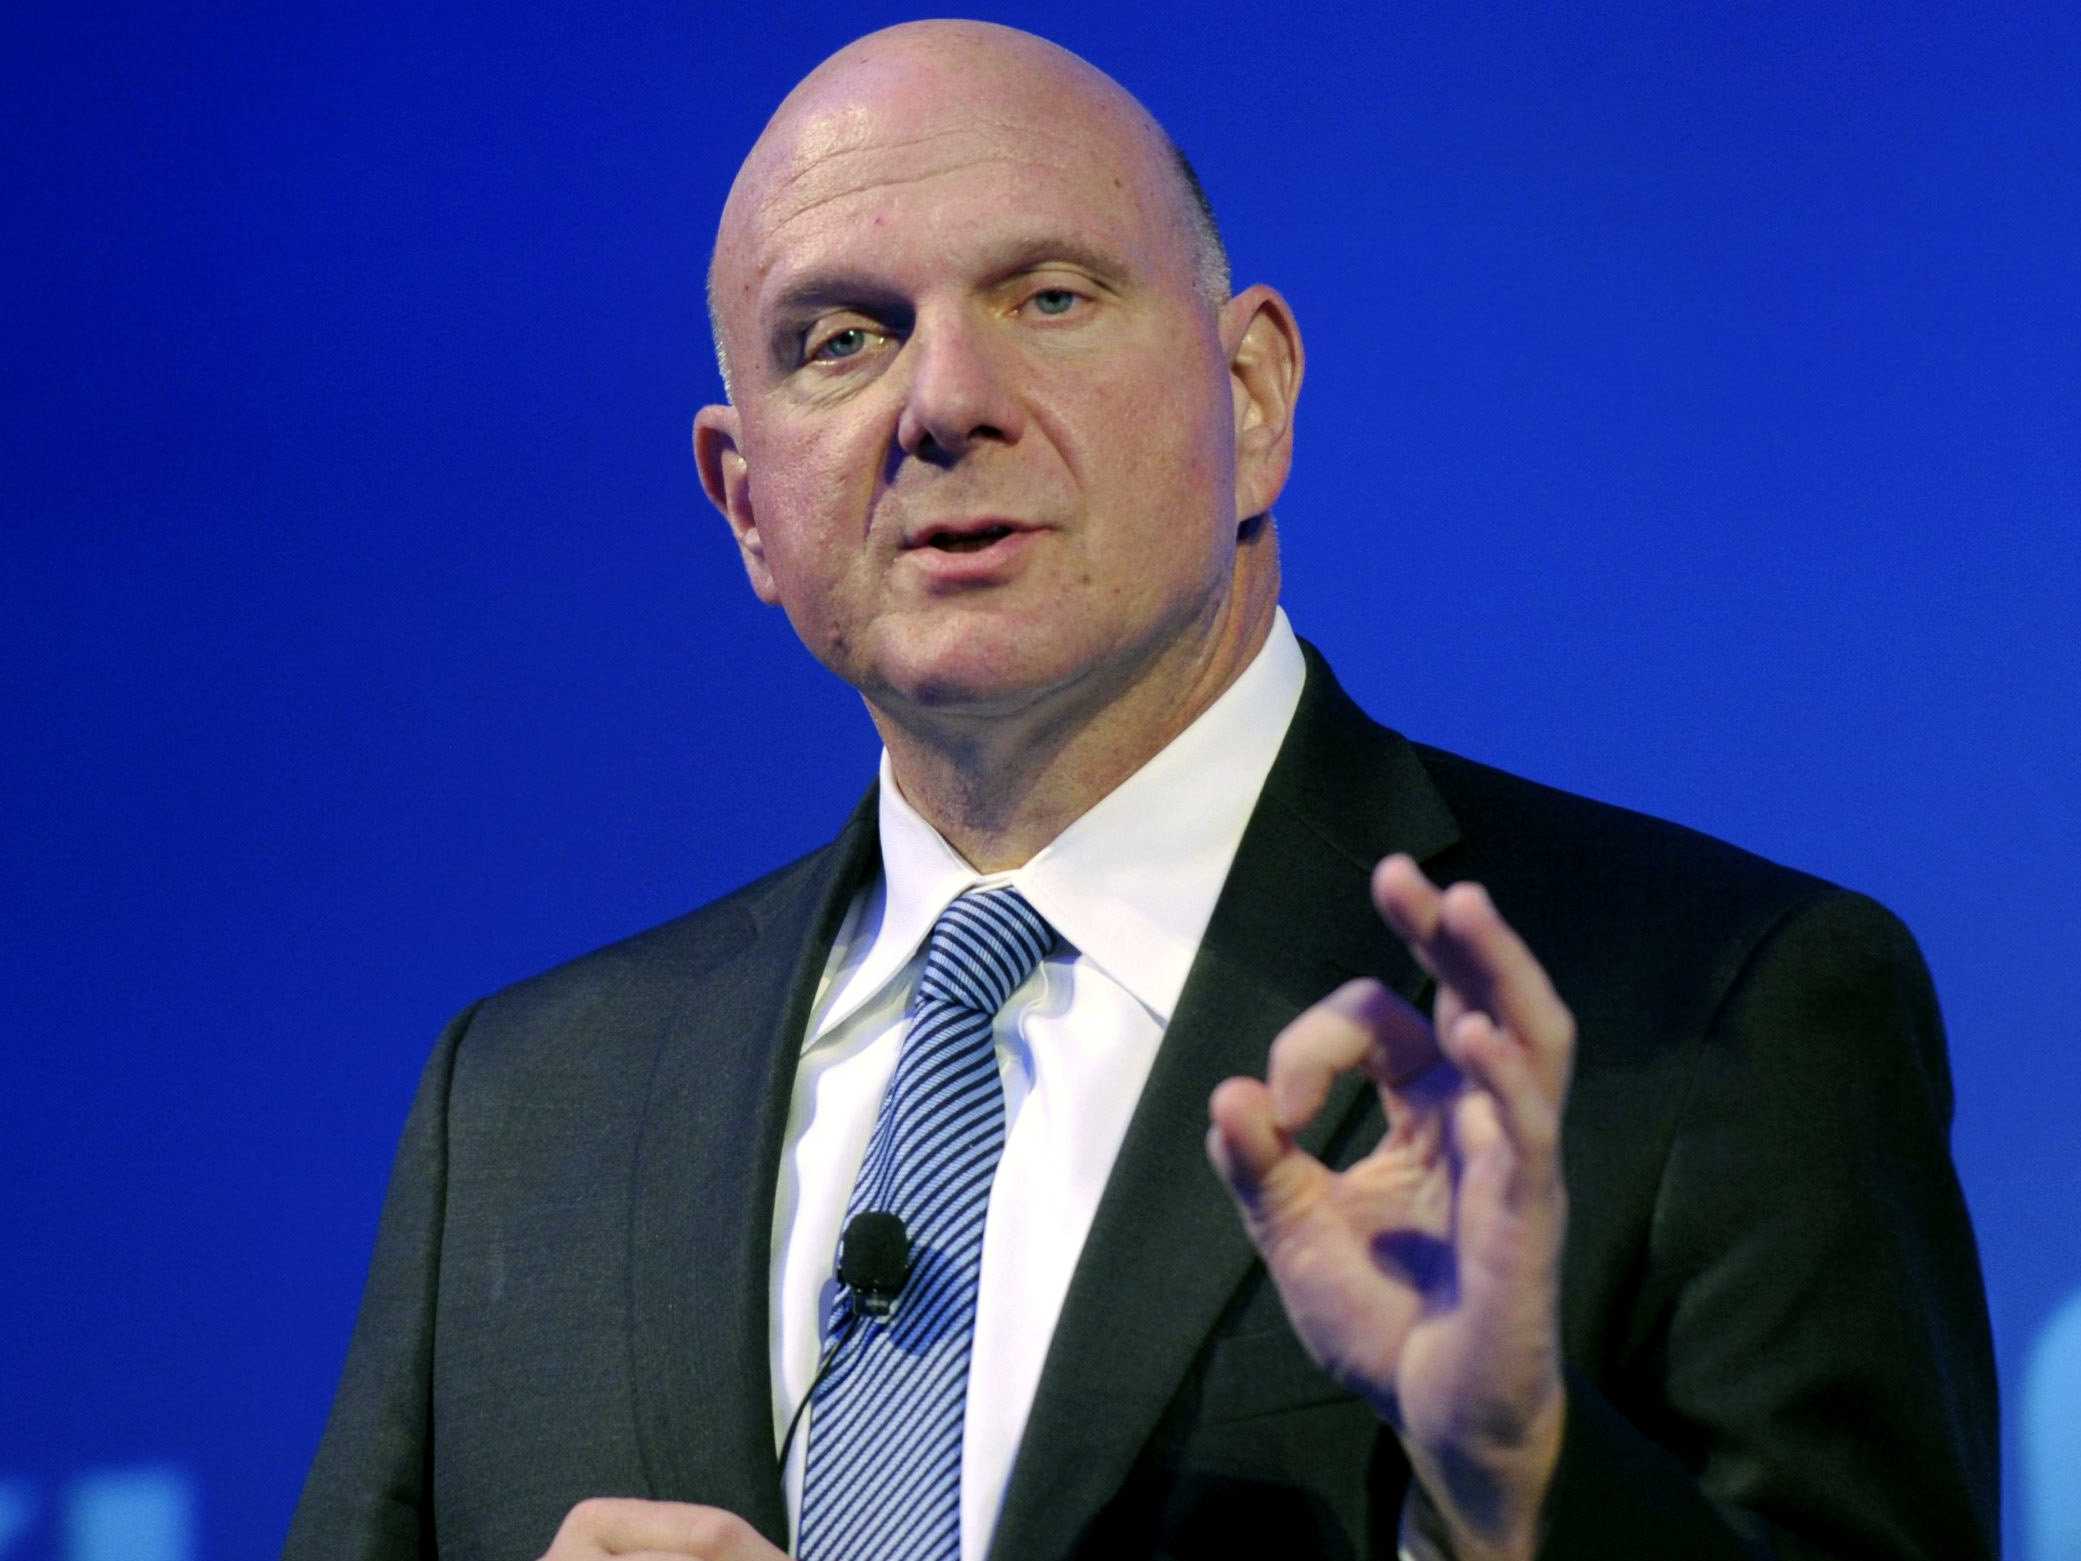 Steve Ballmer Banning Apple iPad’s From the Clippers